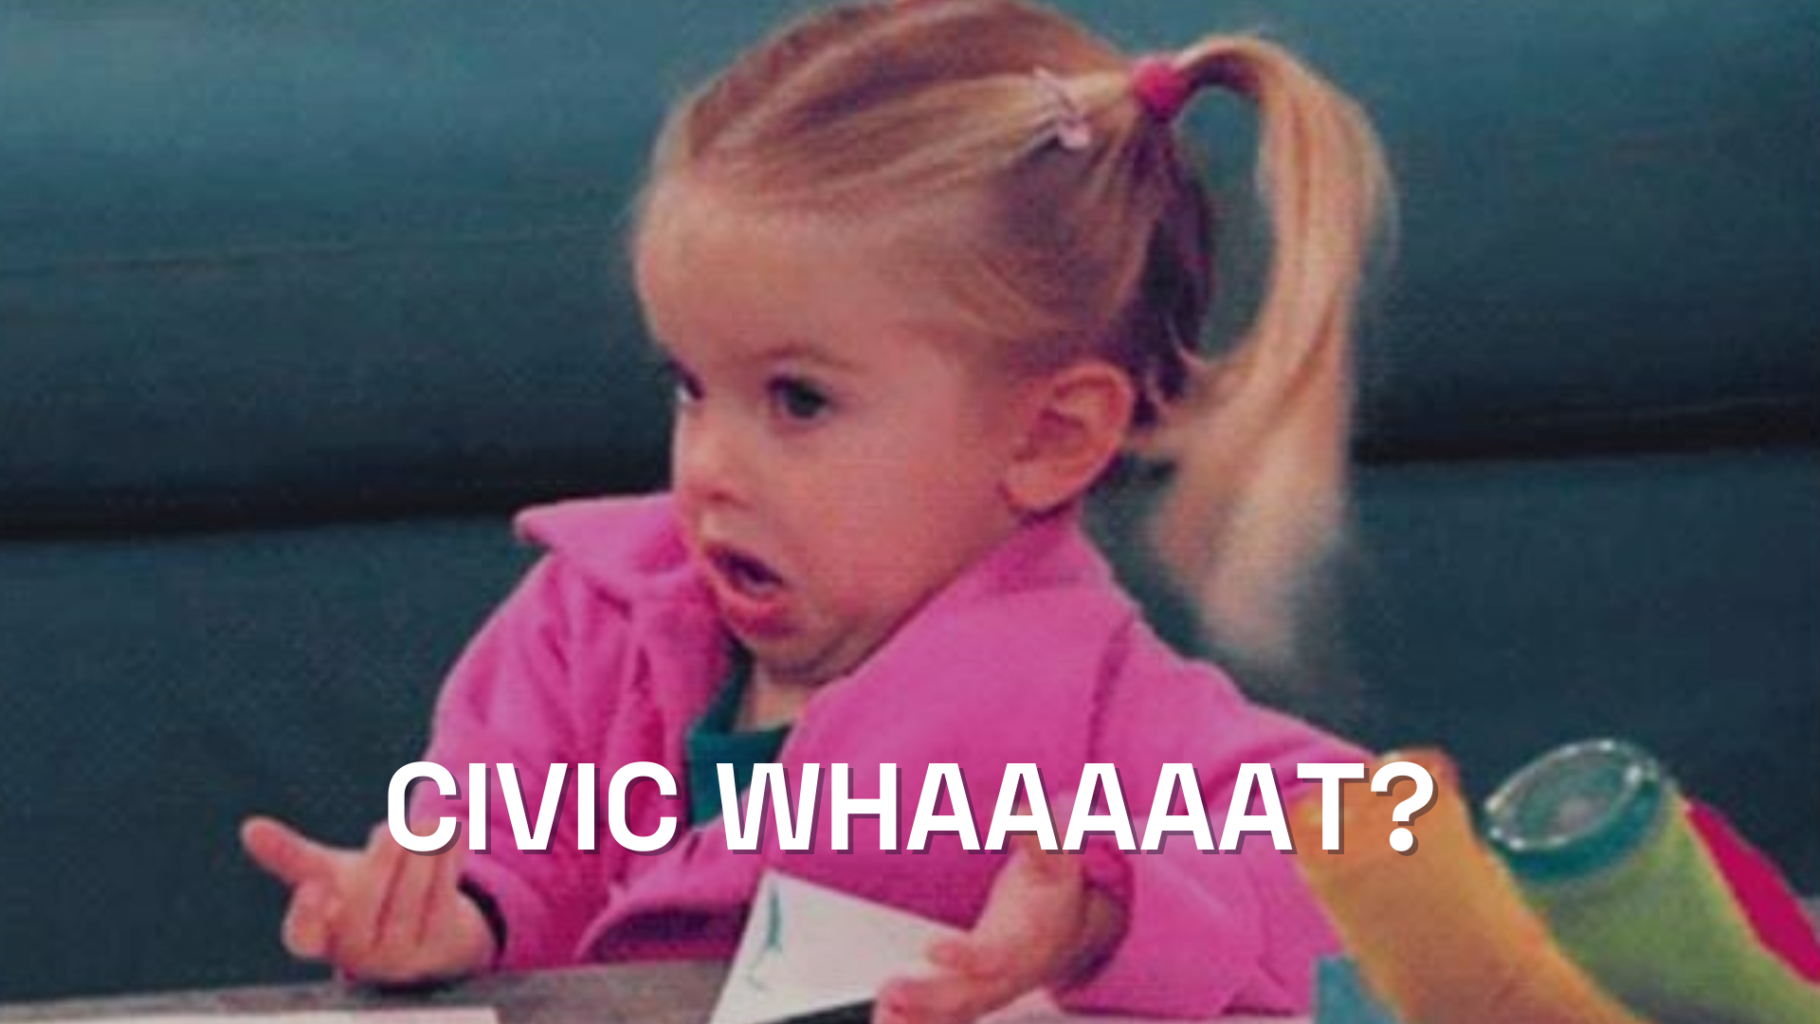 Meme of a child looking confused. The image text reads: Civic whaaaaat?